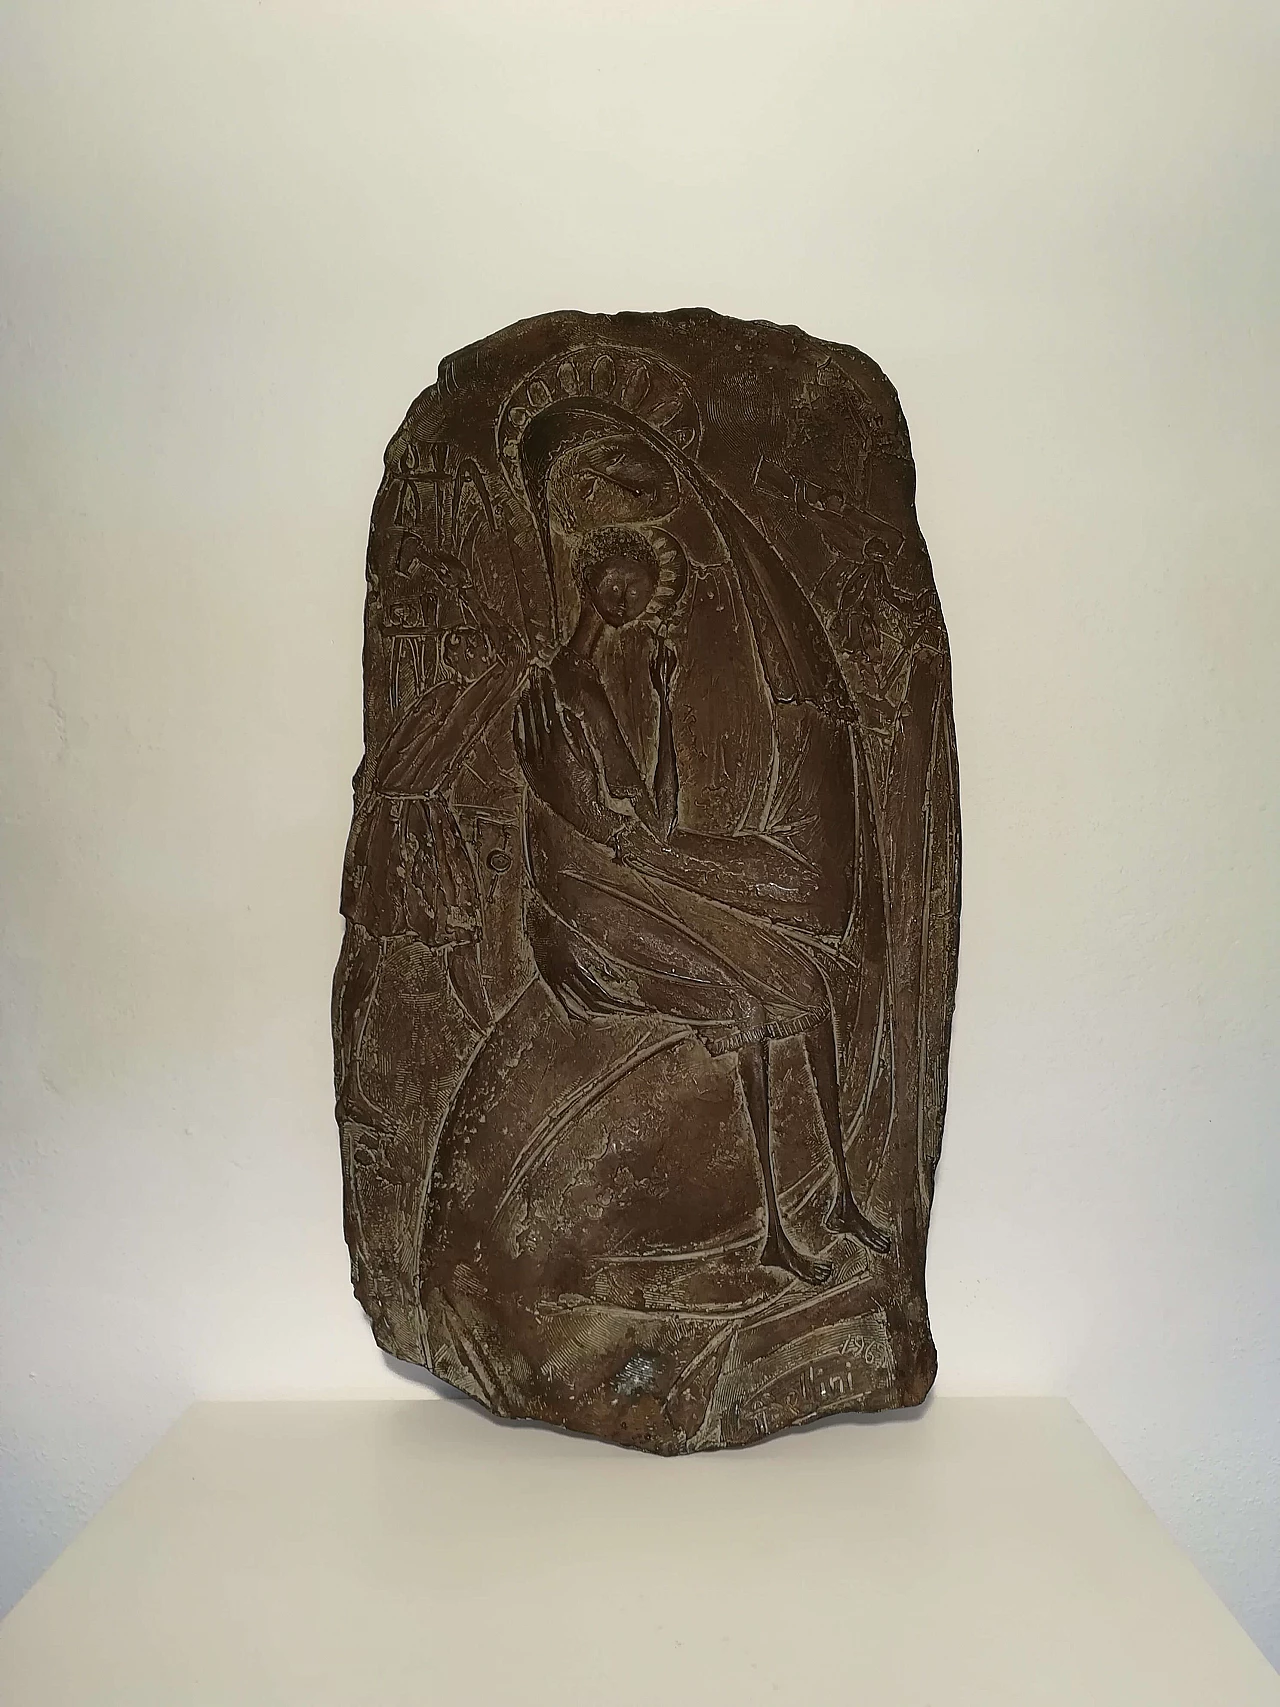 Virgin Mary and Child in bronze by Bellini, 1960s 1078588